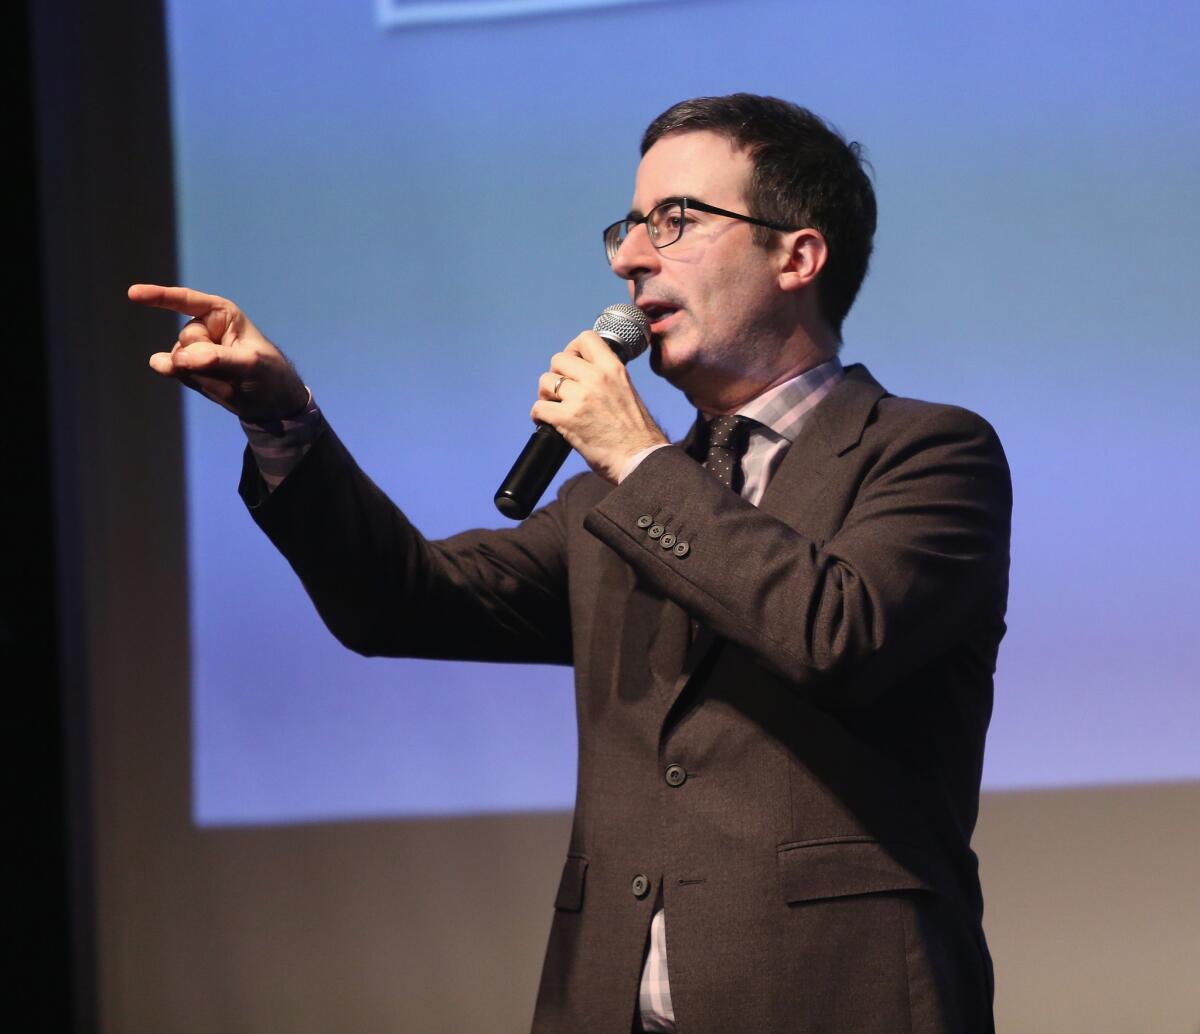 John Oliver attends the 2nd annual LOL With LLS Comedy Night to benefit the Leukemia & Lymphoma Society on May 18, 2015, in New York City.